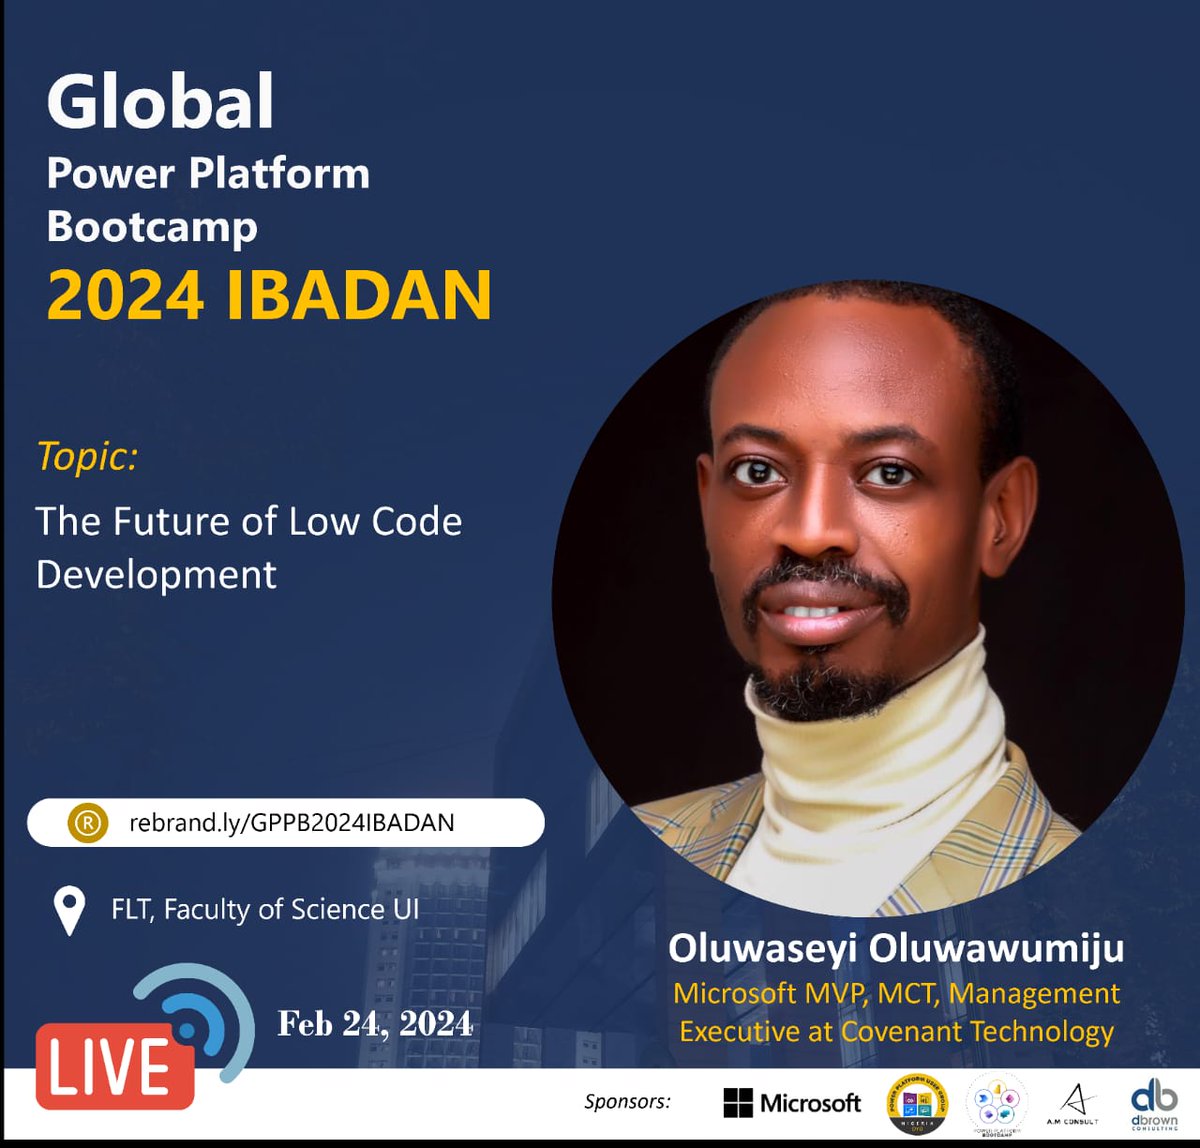 Explore '#TheFutureOfLowCode at #GPPBootcamp2024 with @soluwawumiju Discover how low-code platforms are revolutionizing the way we develop, making tech more accessible than ever. 🛠️ #LowCode Register here: rebrand.ly/GPPB2024IBADAN #GPPB2024 #GPPB2024IBADAN